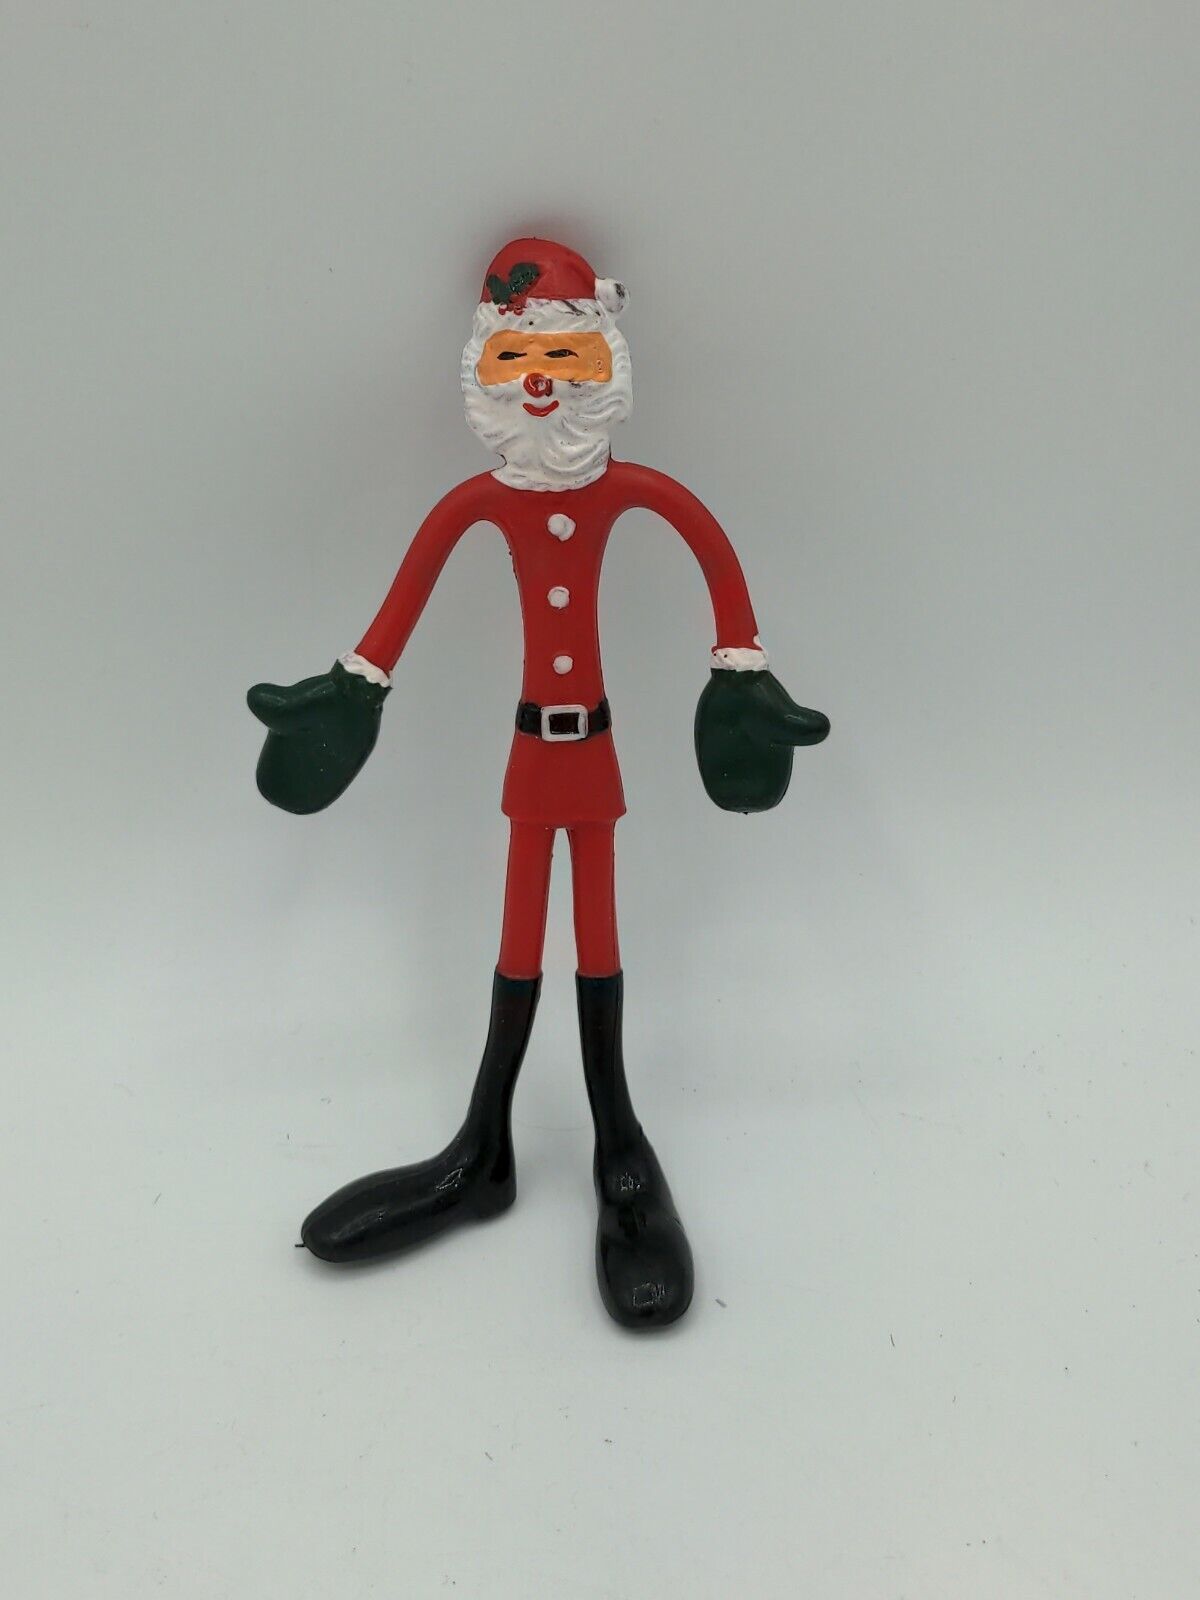 Vintage 1979 AMSCAN Bendy Santa Claus Toy Figurine 5 Inches Tall